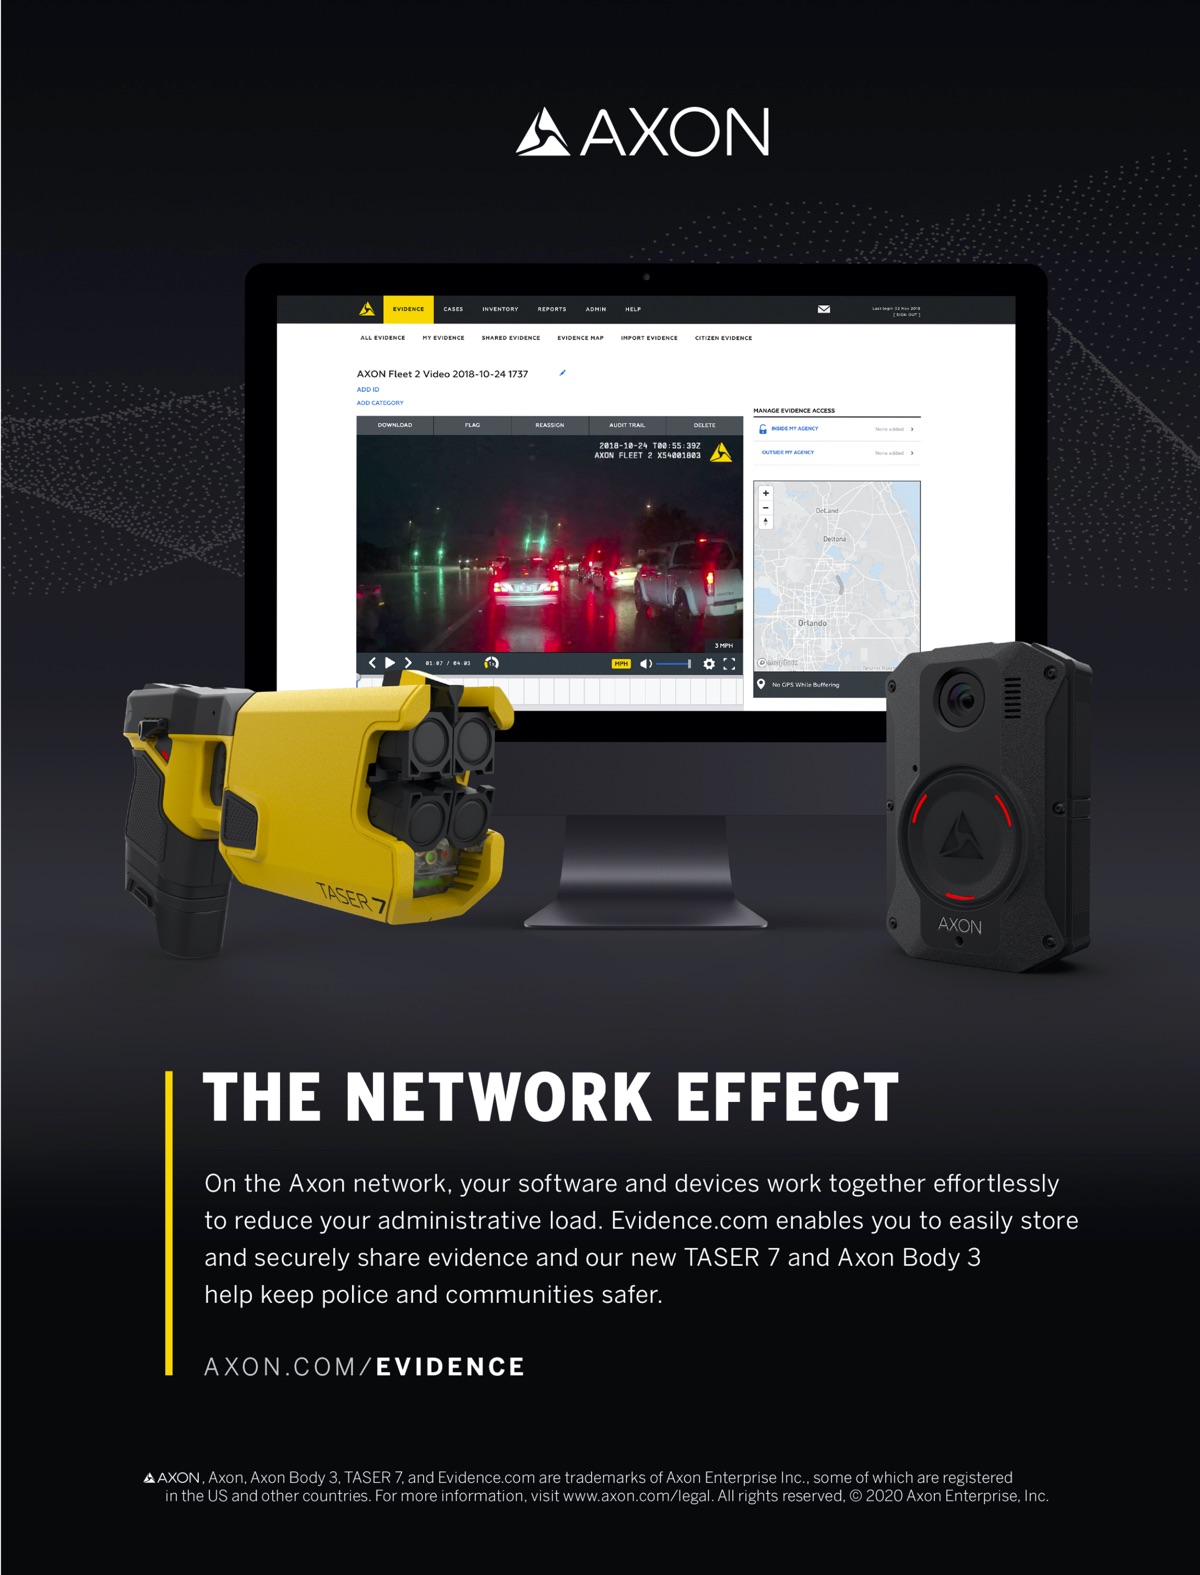 Image: Ad of Axon with text. The Network Effect. On the Axon network, your software and devices work together effortlessly to reduce your administrative load. Evidence.com enables you to easily store and securely share evidence and our new TASER 7 and Axon Body 3 help keep police and communities safer. Visit www.axon.com/evidence.